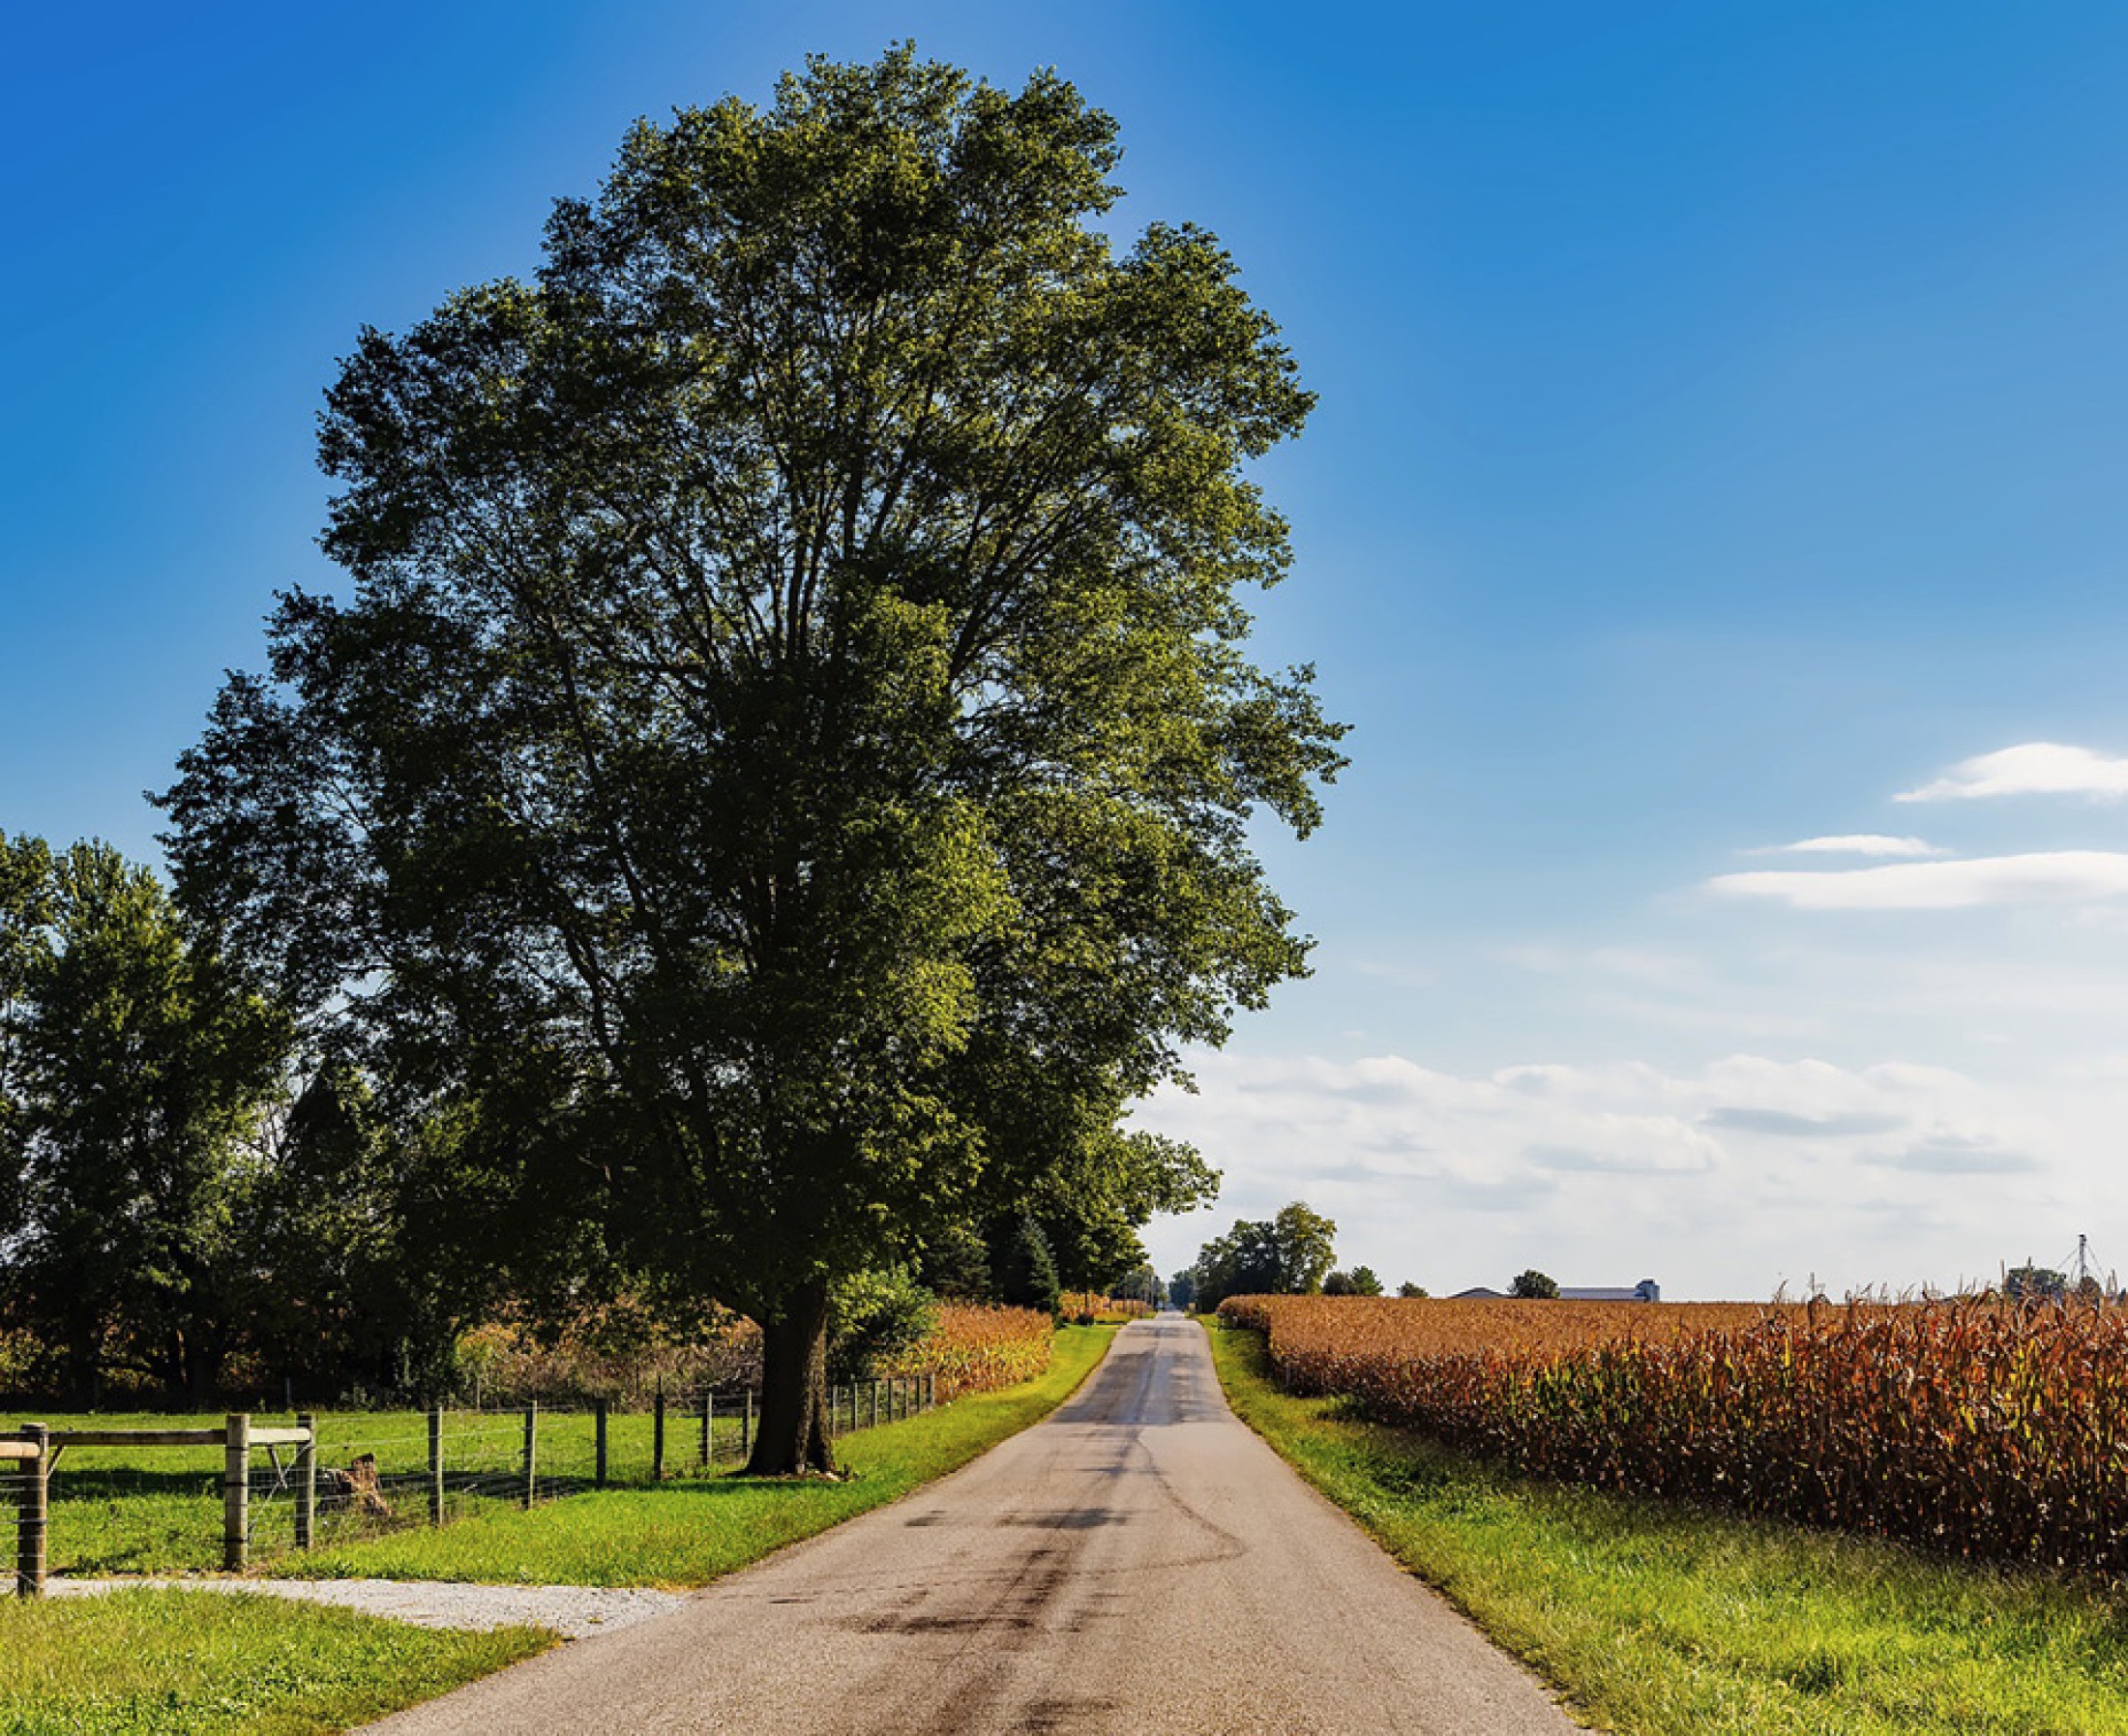 Image of a county road with trees on one side and a corn field on the other.